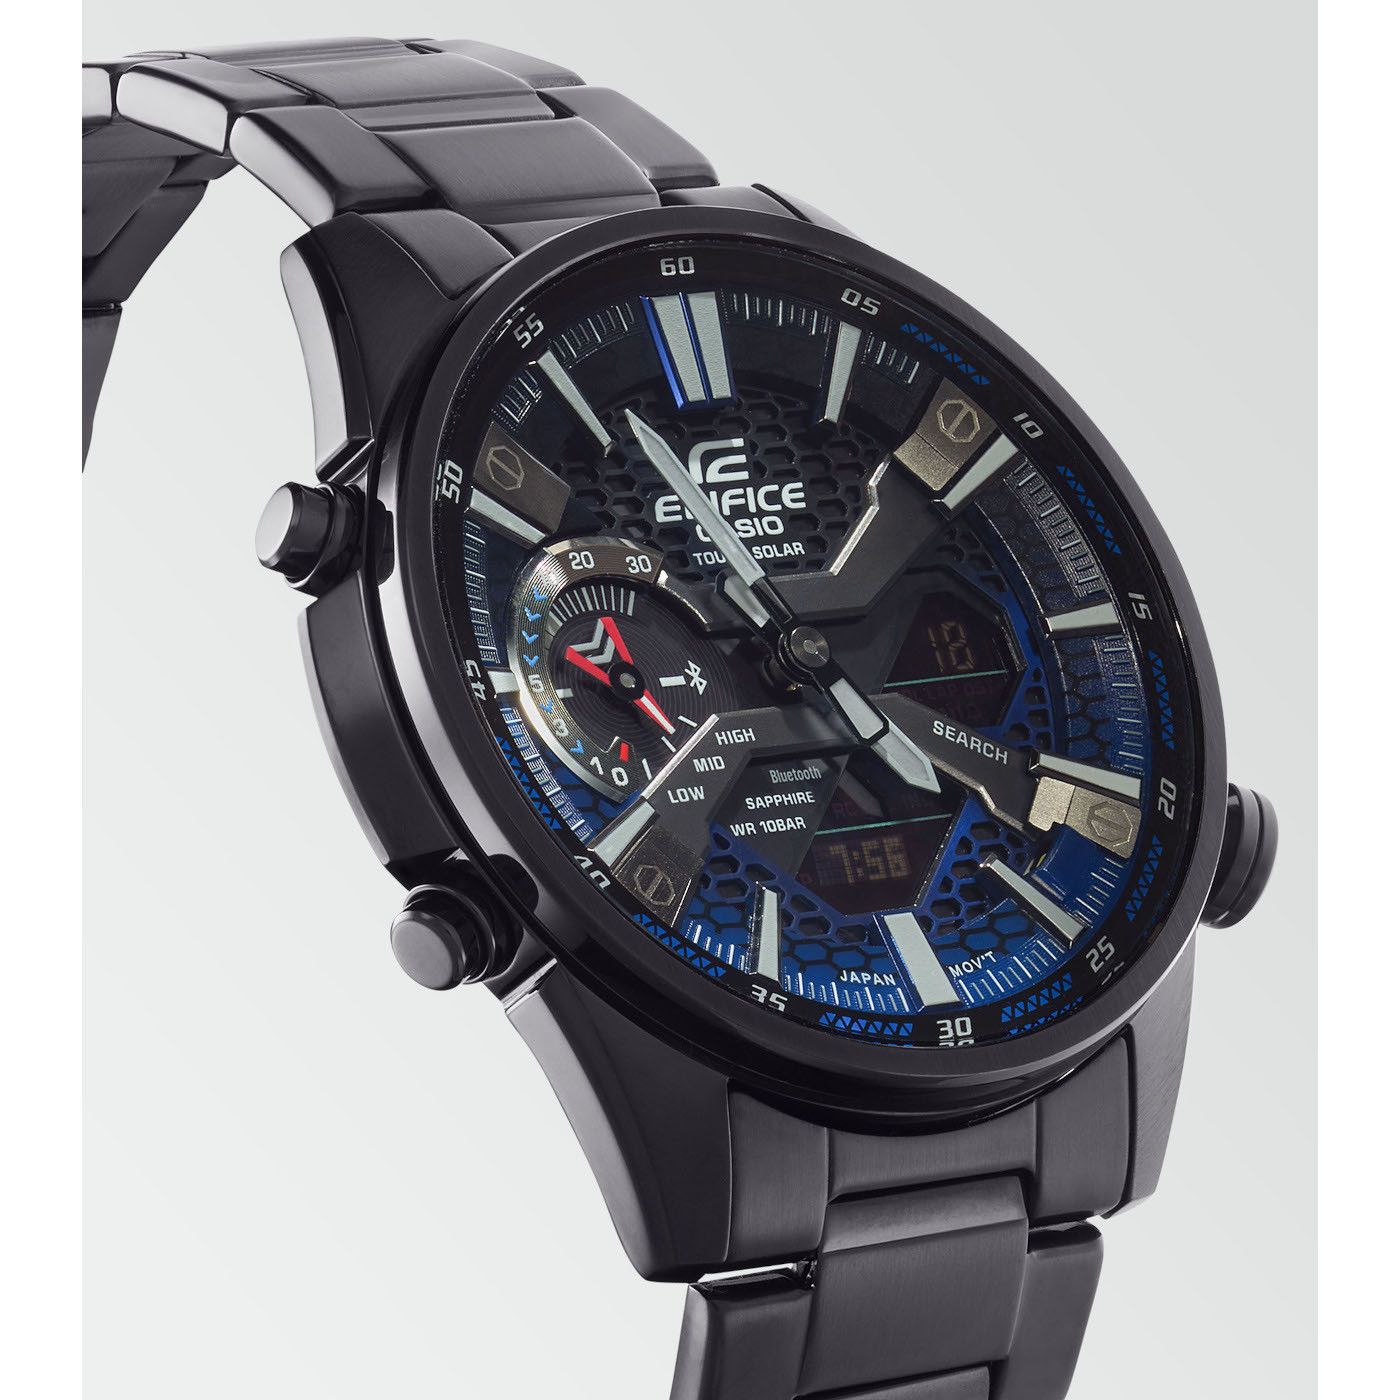 This Casio Edifice Analogue-Digital Watch for Men is the perfect timepiece to wear or to gift. It's Black 42 mm Round case combined with the comfortable Black Stainless steel watch band will ensure you enjoy this stunning timepiece without any compromise. Operated by a high quality Quartz movement and water resistant to 10 bars, your watch will keep ticking. This sporty and clasical watch is perfect for every occasion! -The watch has a calendar function: Day-Date, Bluetooth, Solar Powered, Stop Watch, Worldtime, Countdown High quality 21 cm length and 21 mm width Black Stainless steel strap with a Fold over with push button clasp Case diameter: 42 mm,case thickness: 10 mm, case colour: Black and dial colour: Black